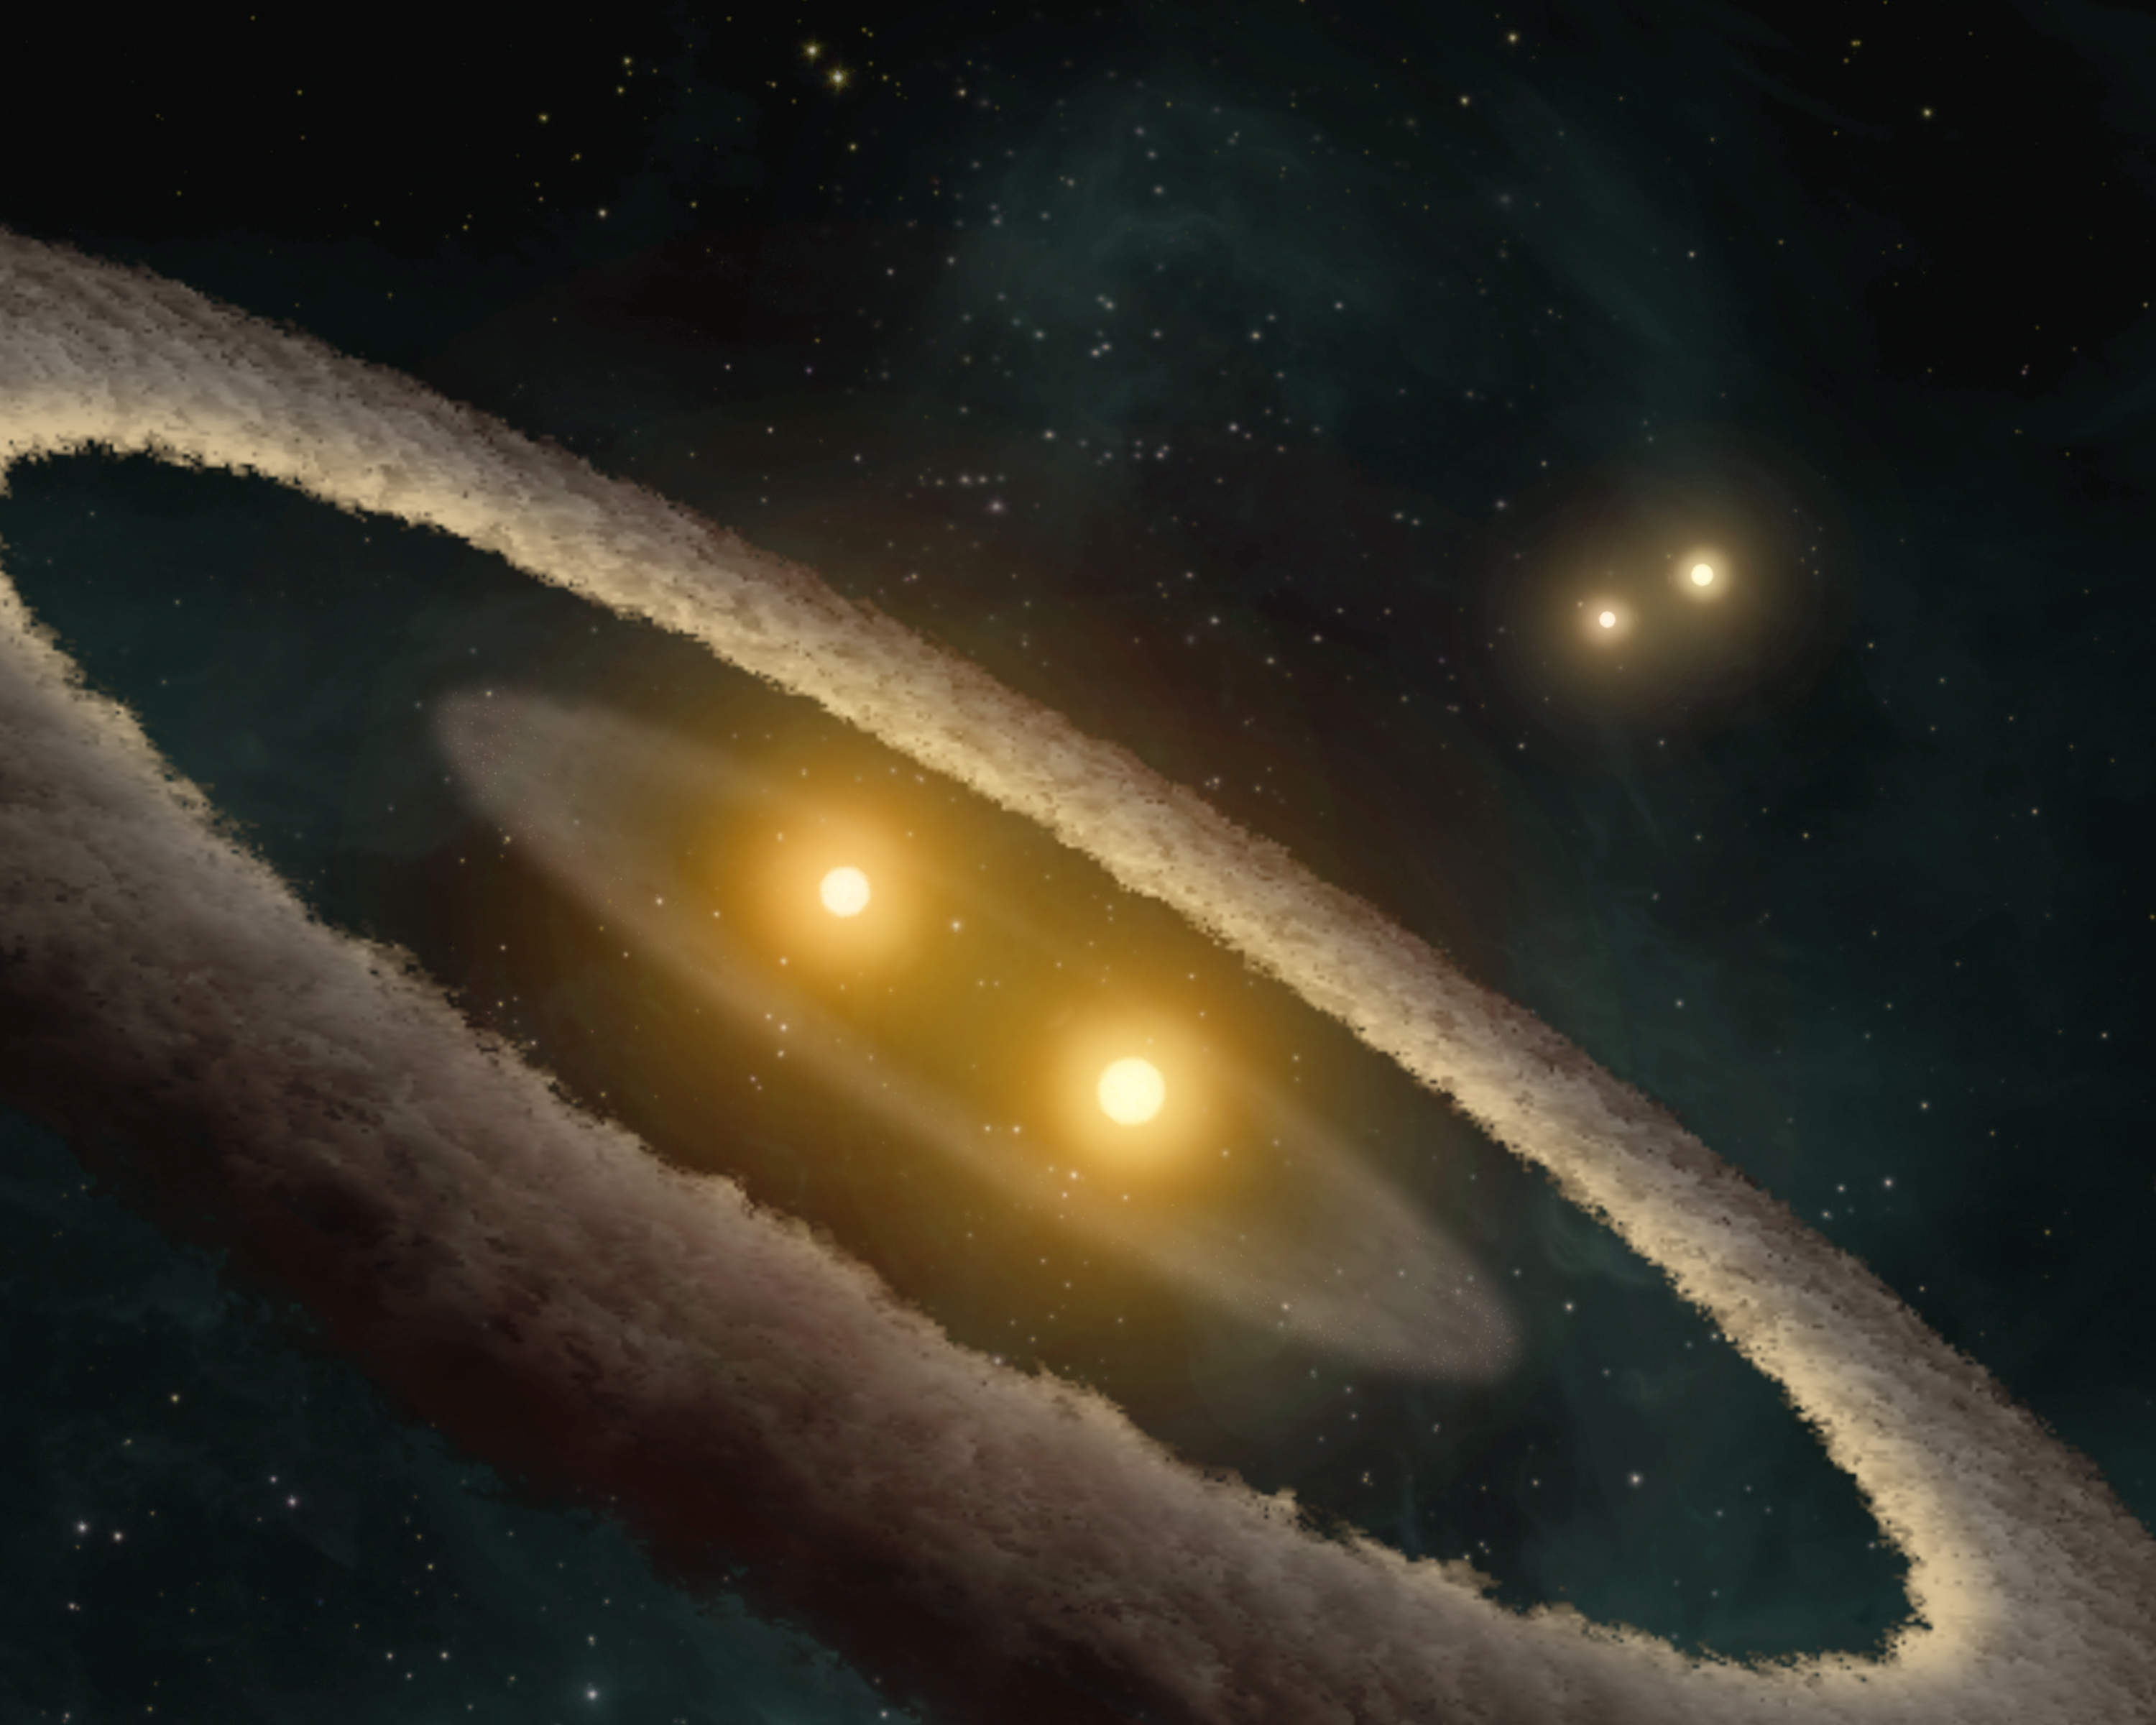 The Four Suns of HD 98800